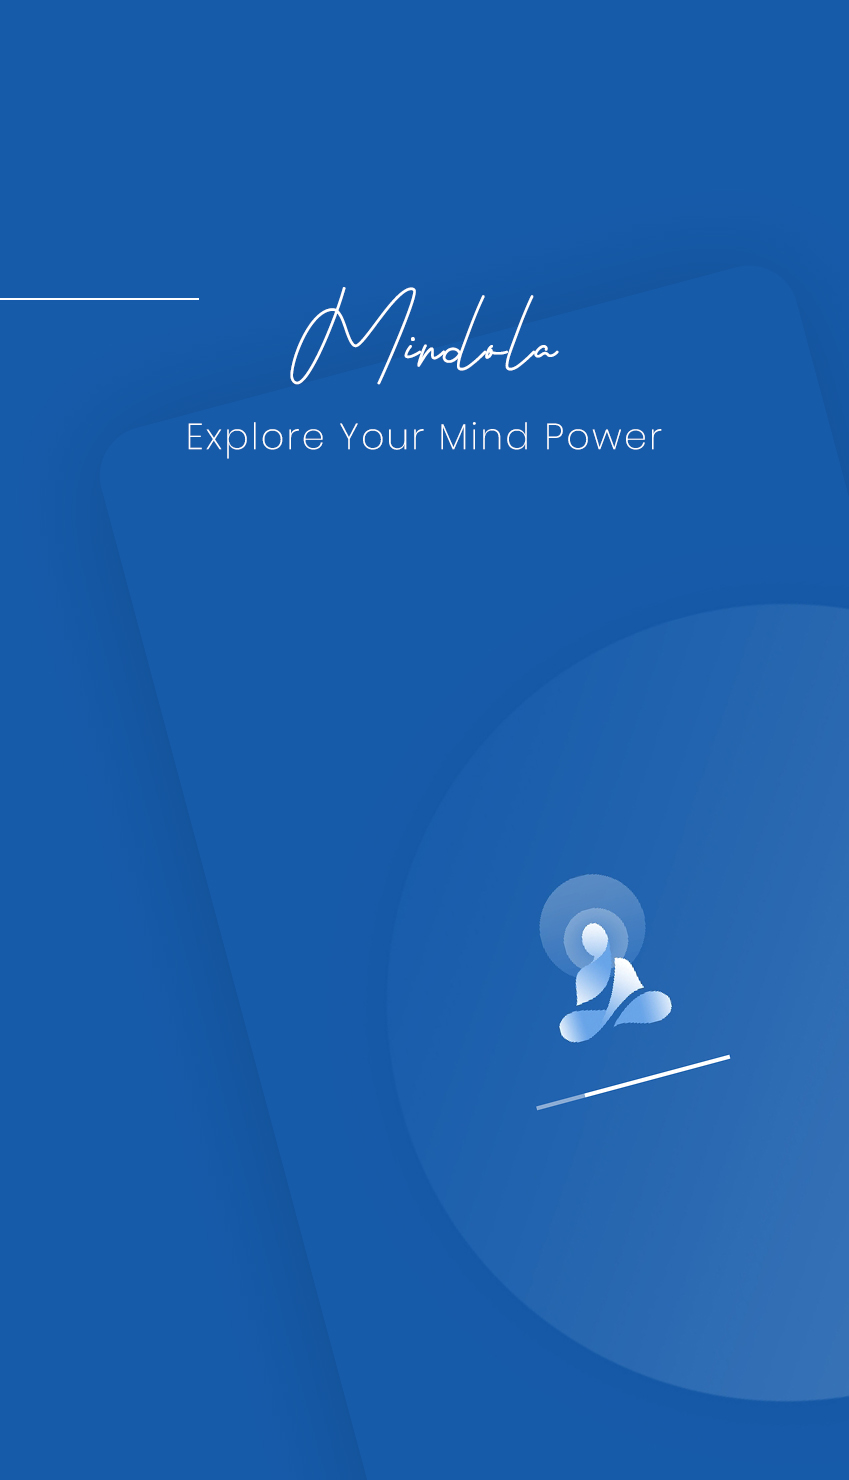 Mindola - Law of Attraction & Mind Power